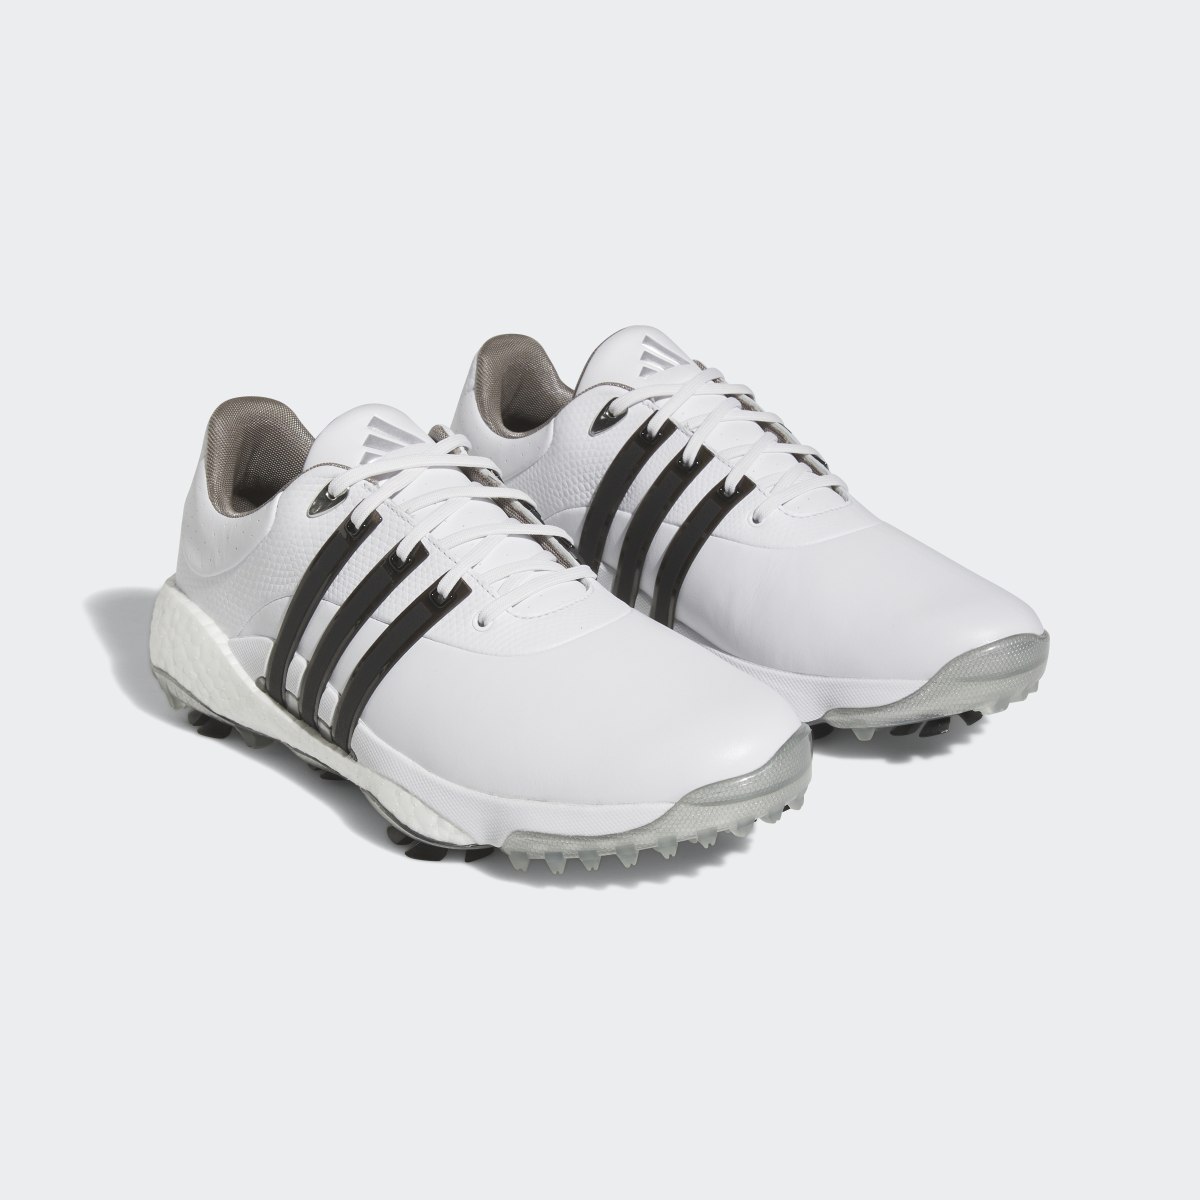 Adidas Tour360 22 BOOST Golf Shoes. 5